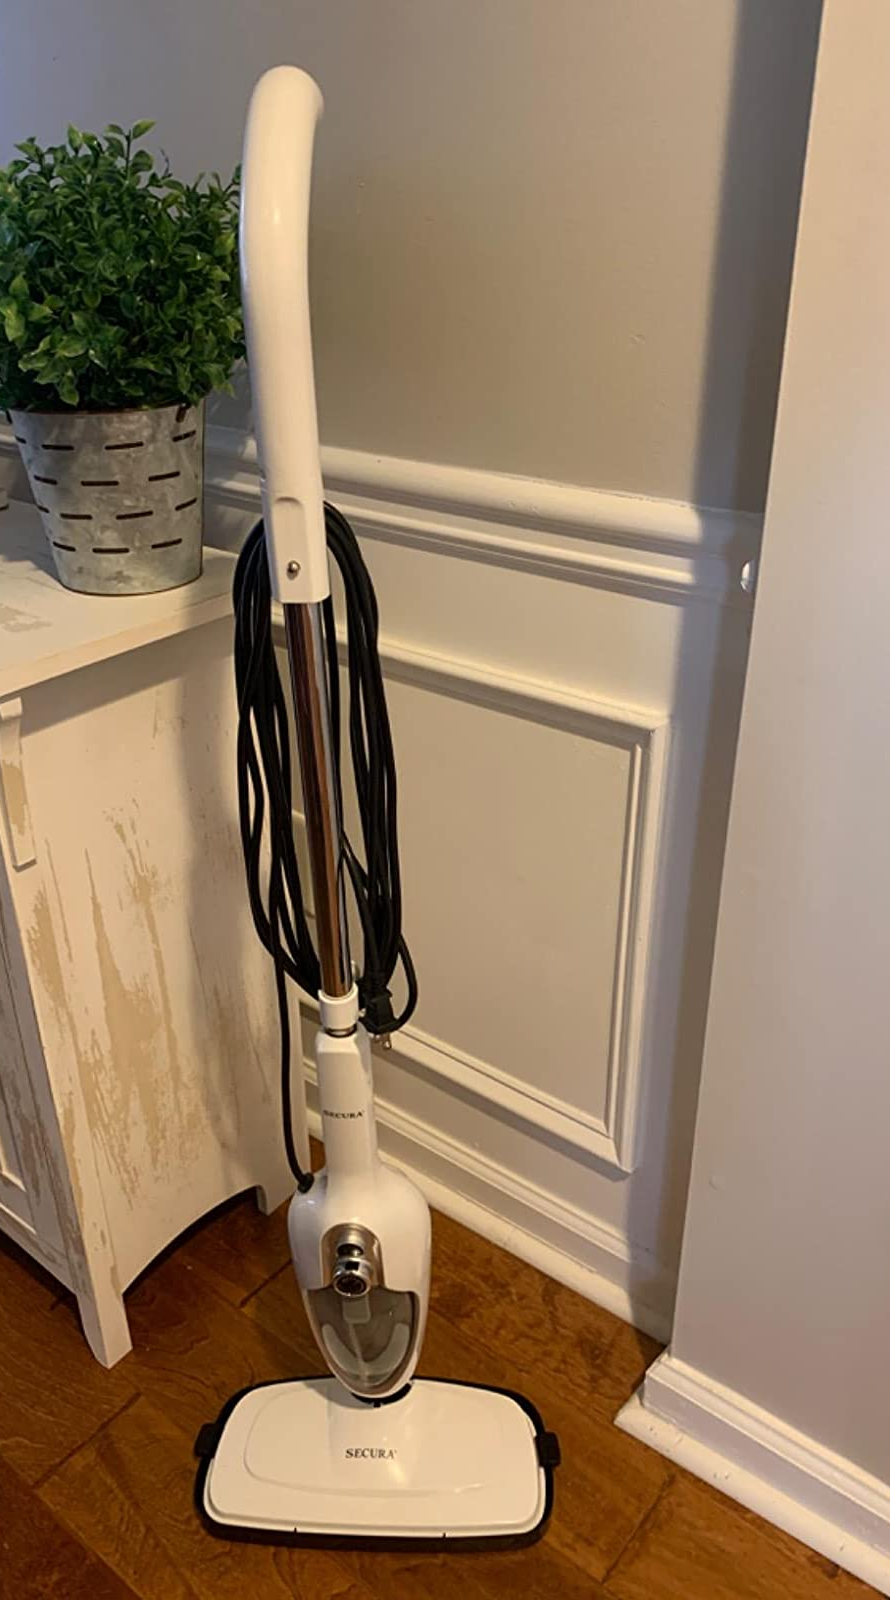 What Floors Can You Use a Steam Mop On?